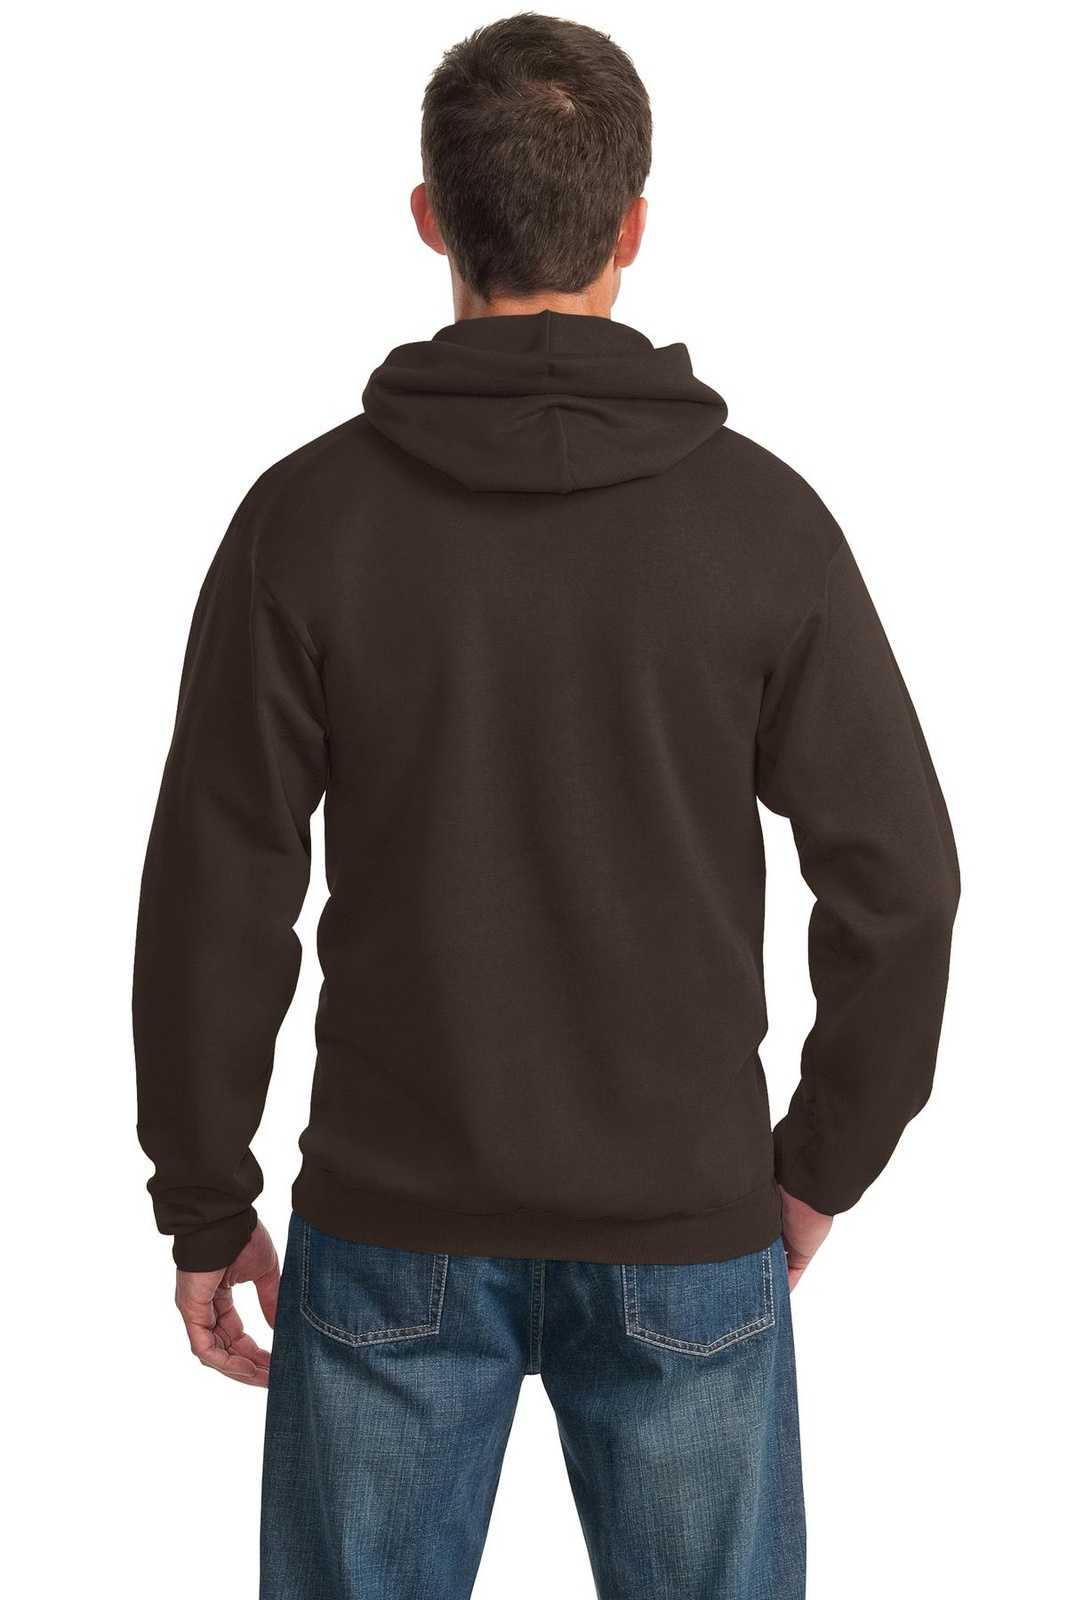 Port &amp; Company PC90H Essential Fleece Pullover Hooded Sweatshirt - Dark Chocolate Brown - HIT a Double - 2